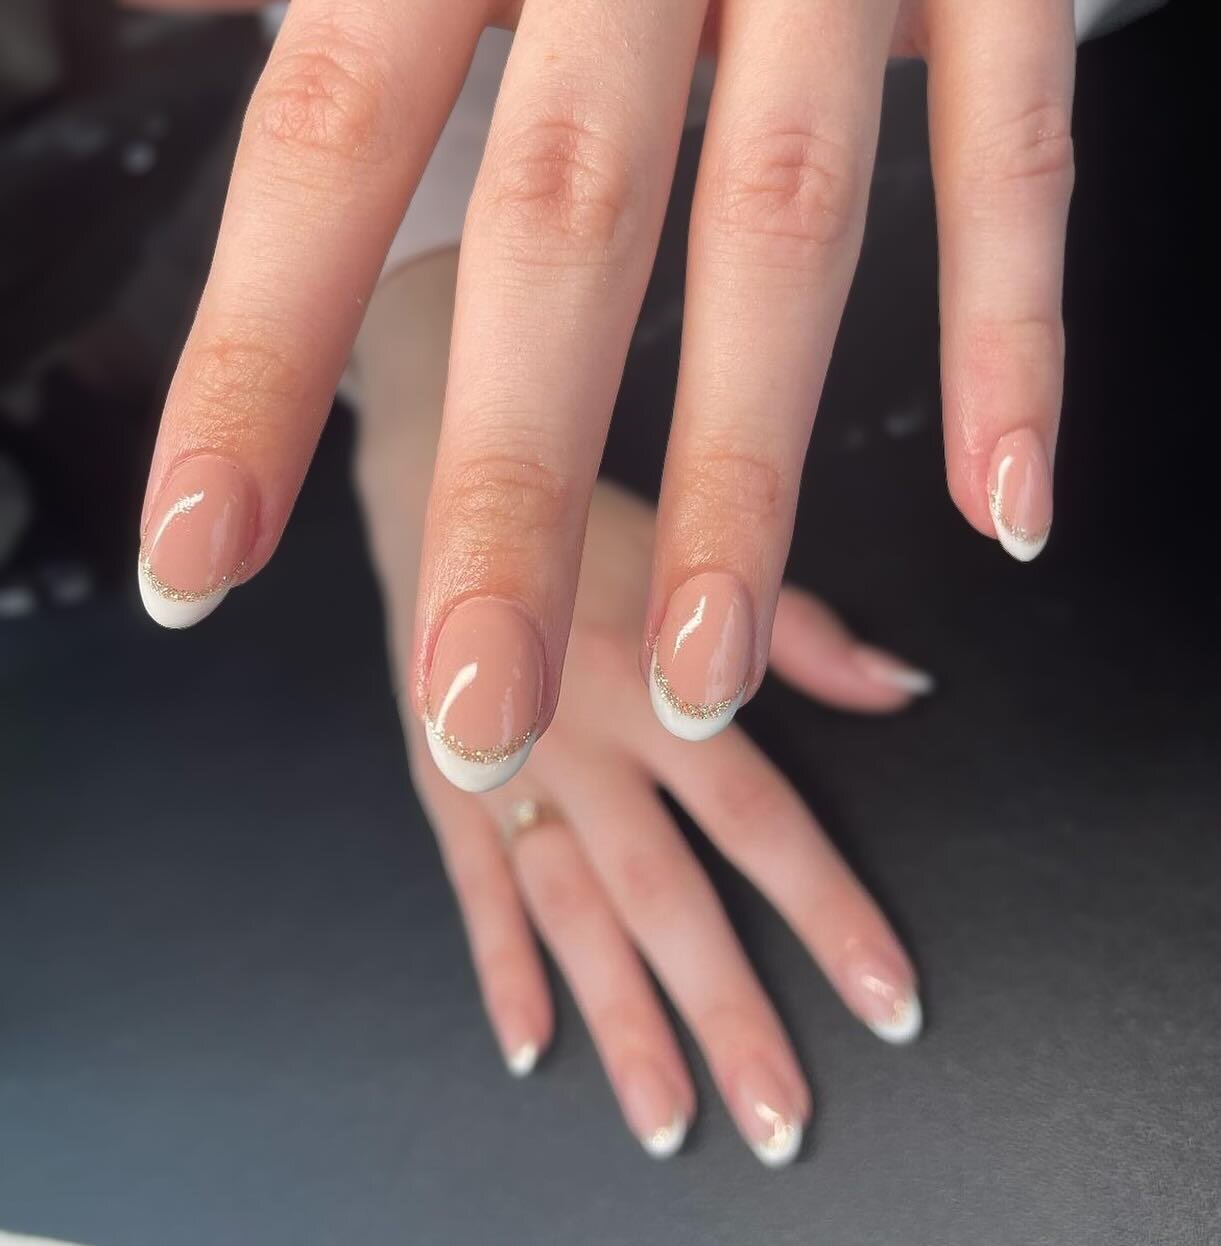 Some fun sets by @mlizzg_beauty !🫶🏼🩵

Click the link in our bio to book!

#nailsnailsnails #springnails #naildesign #nailart #fortpierce #pslnails